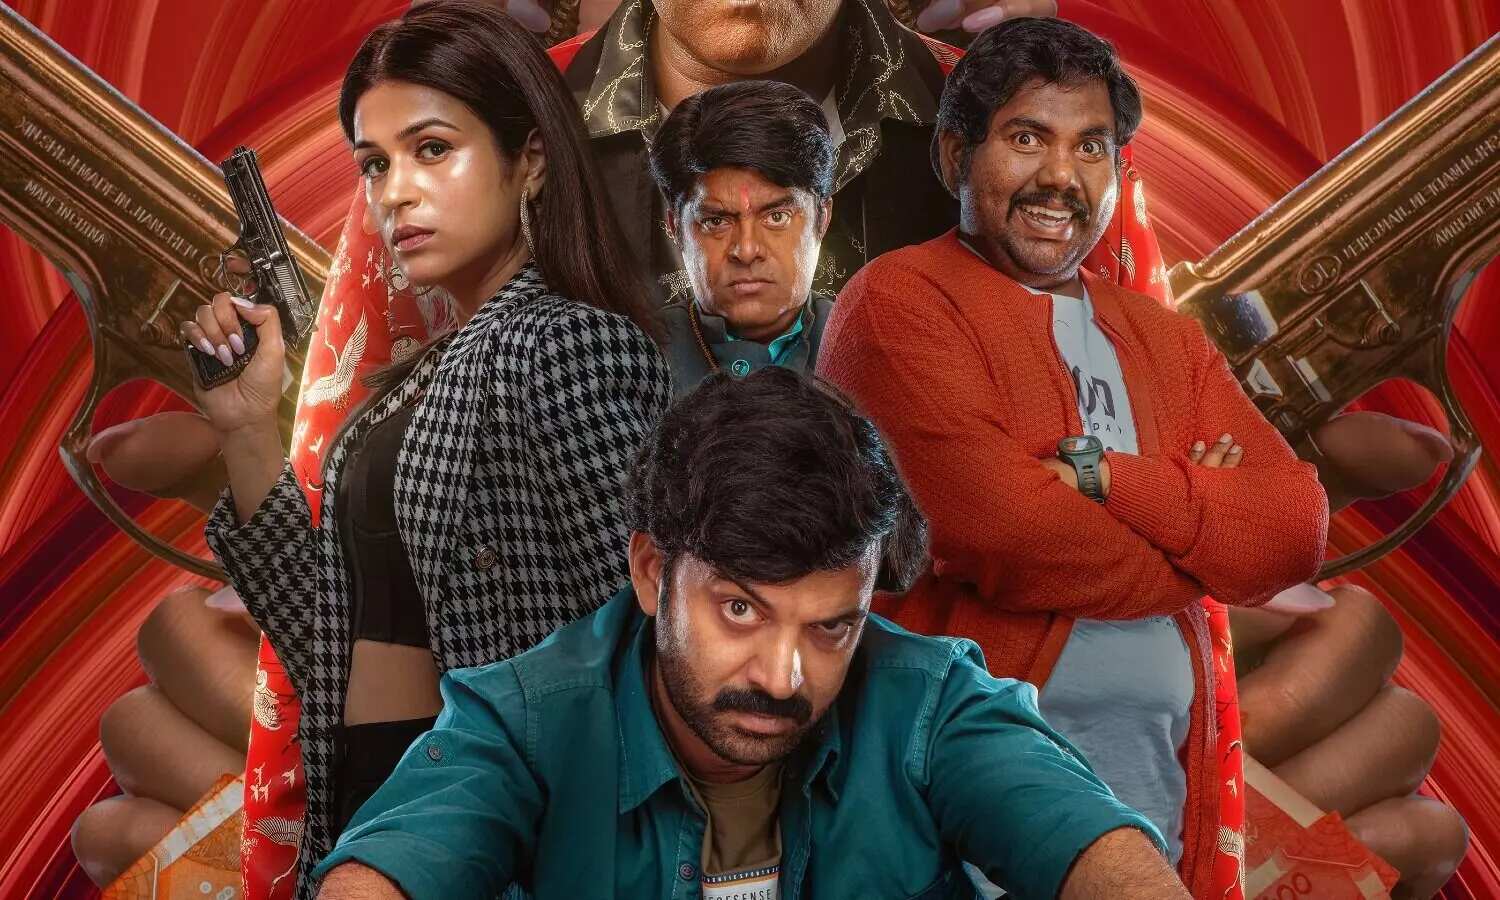 https://www.mobilemasala.com/movie-review/Paarijatha-Parvam-Review---The-Chaitanya-Rao-Shraddha-Das-starrer-is-a-clueless-crime-comedy-which-fails-to-entertain-i255603